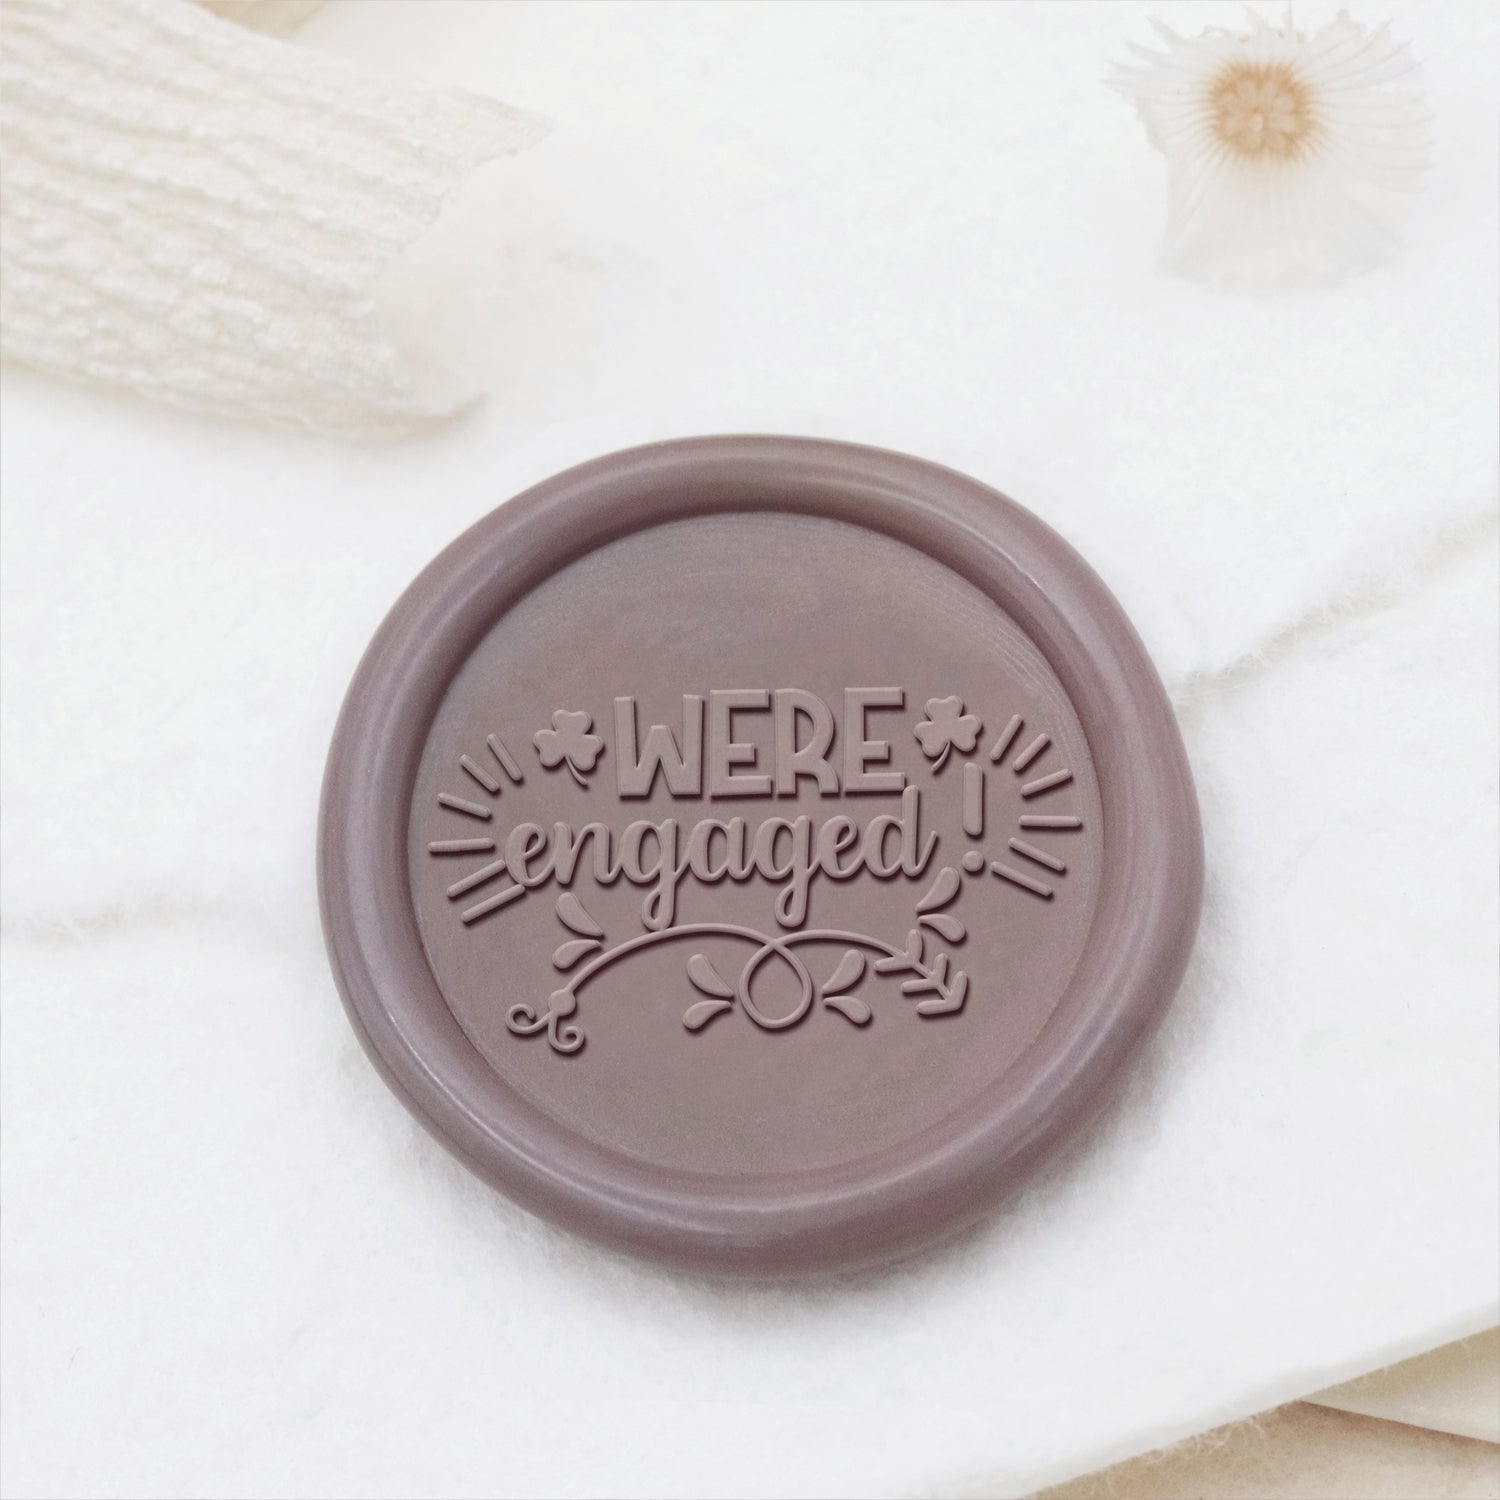 Wedding Invitation & Announcement Wax Seal Stamp - Style 22 22-2